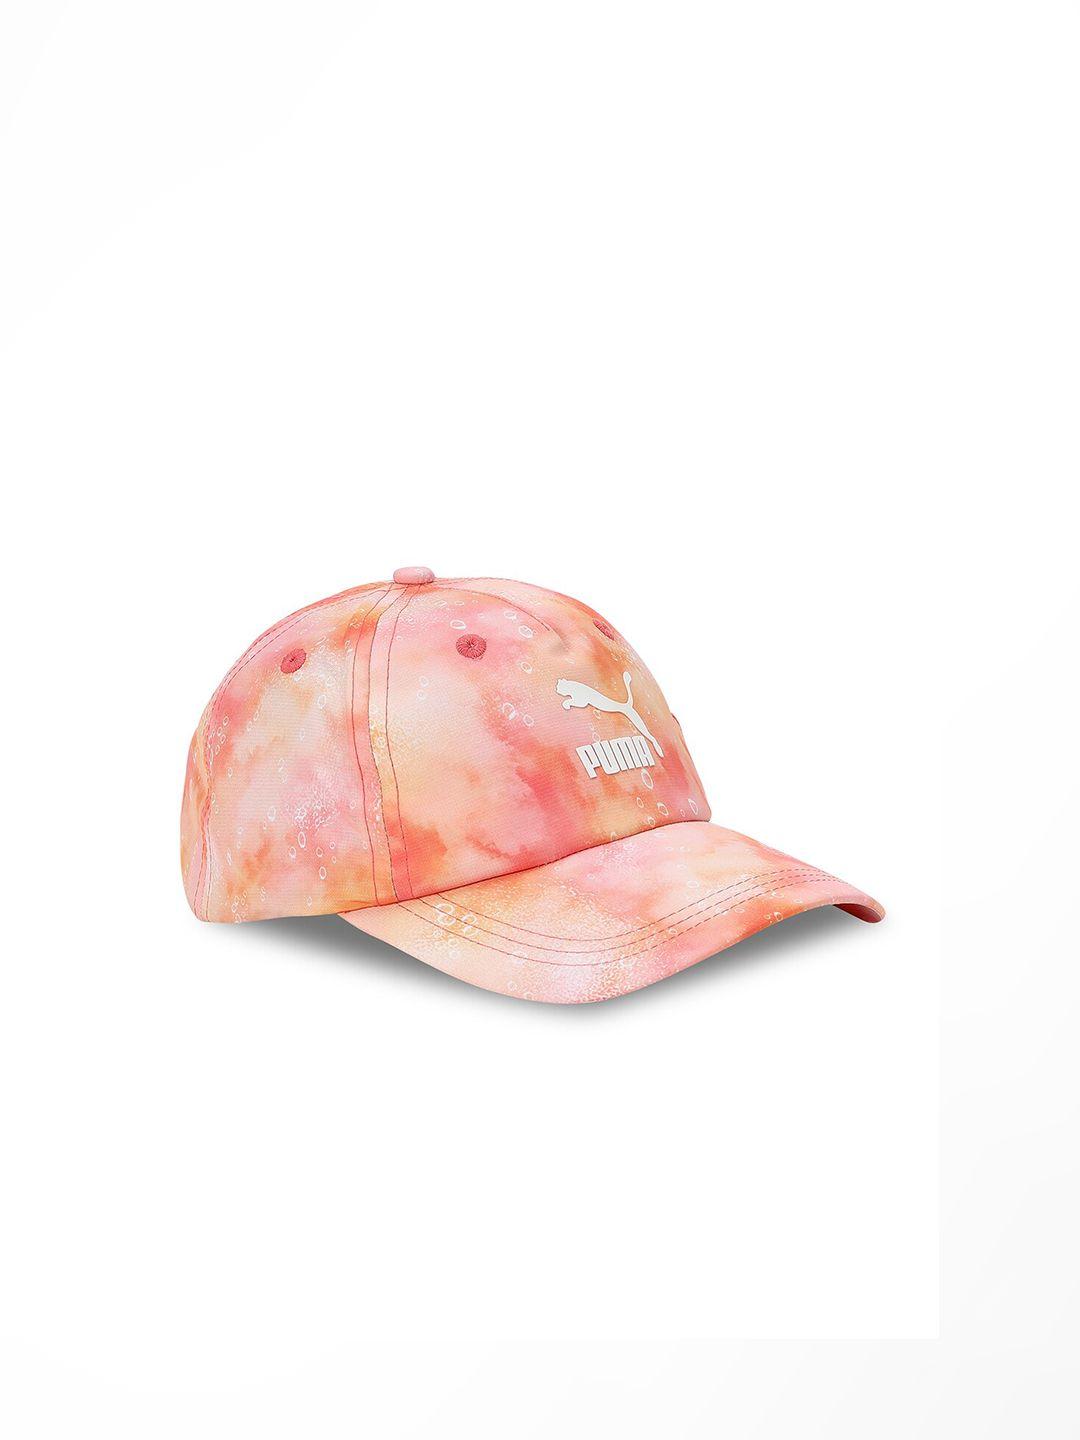 puma kids tie & dyed summer squeeze aop youth baseball cap